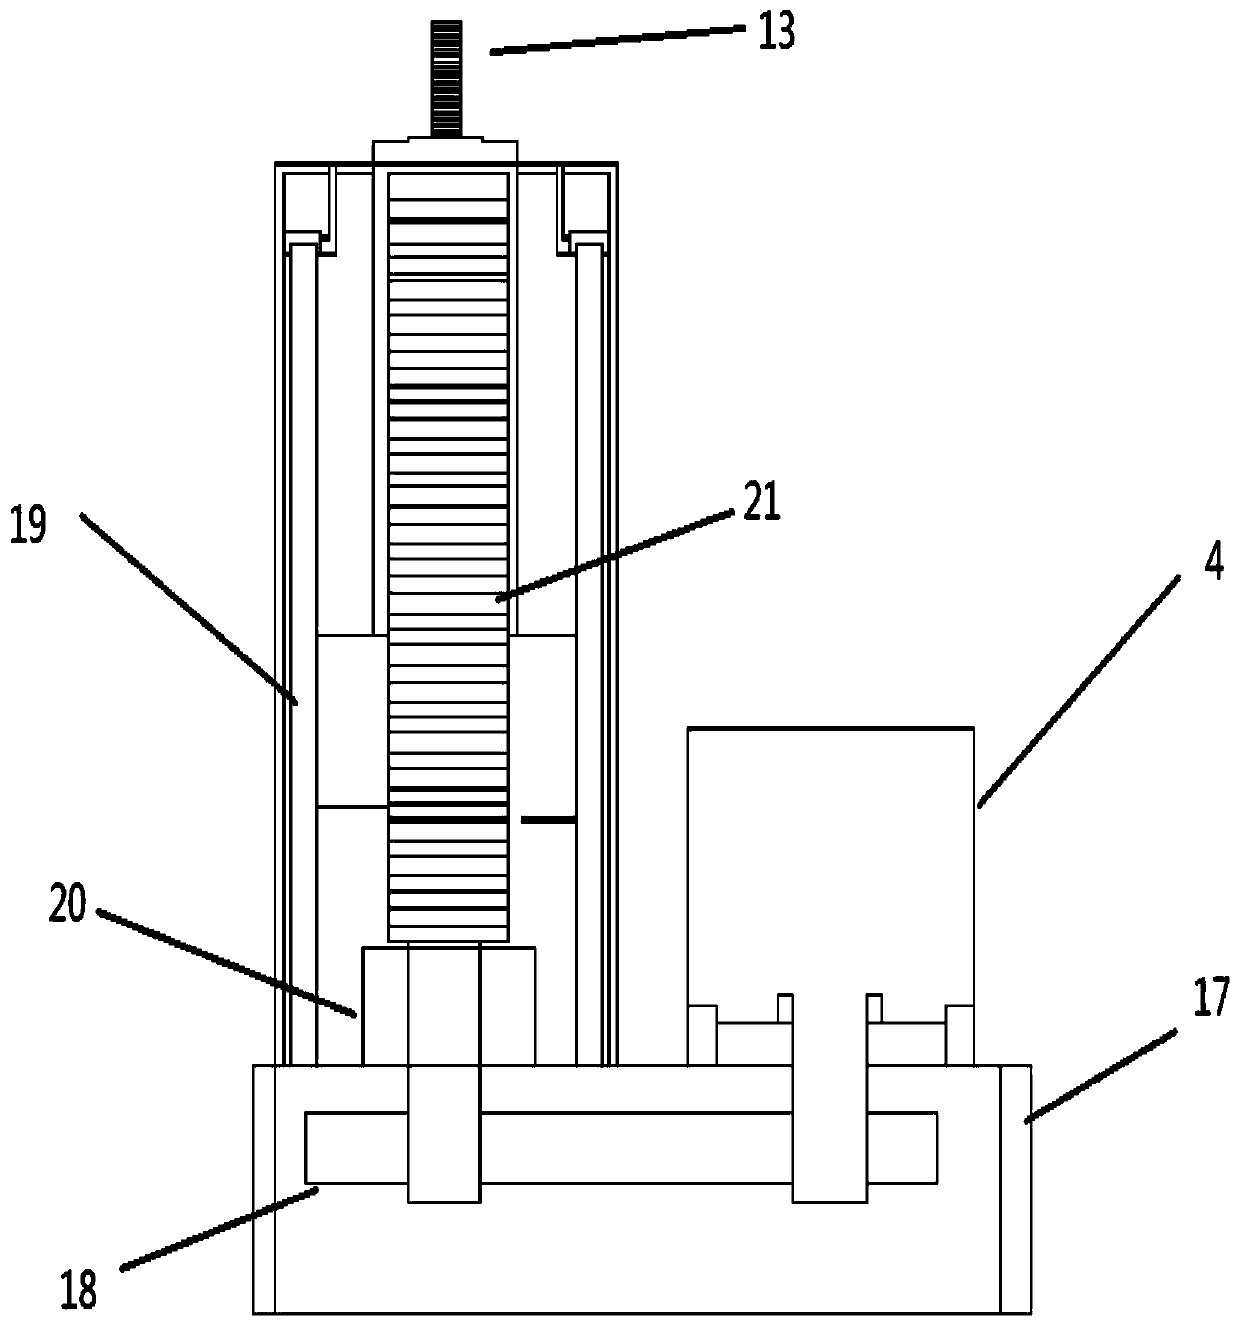 Experimental device for studying vertical penetration phenomenon of floating ice plate